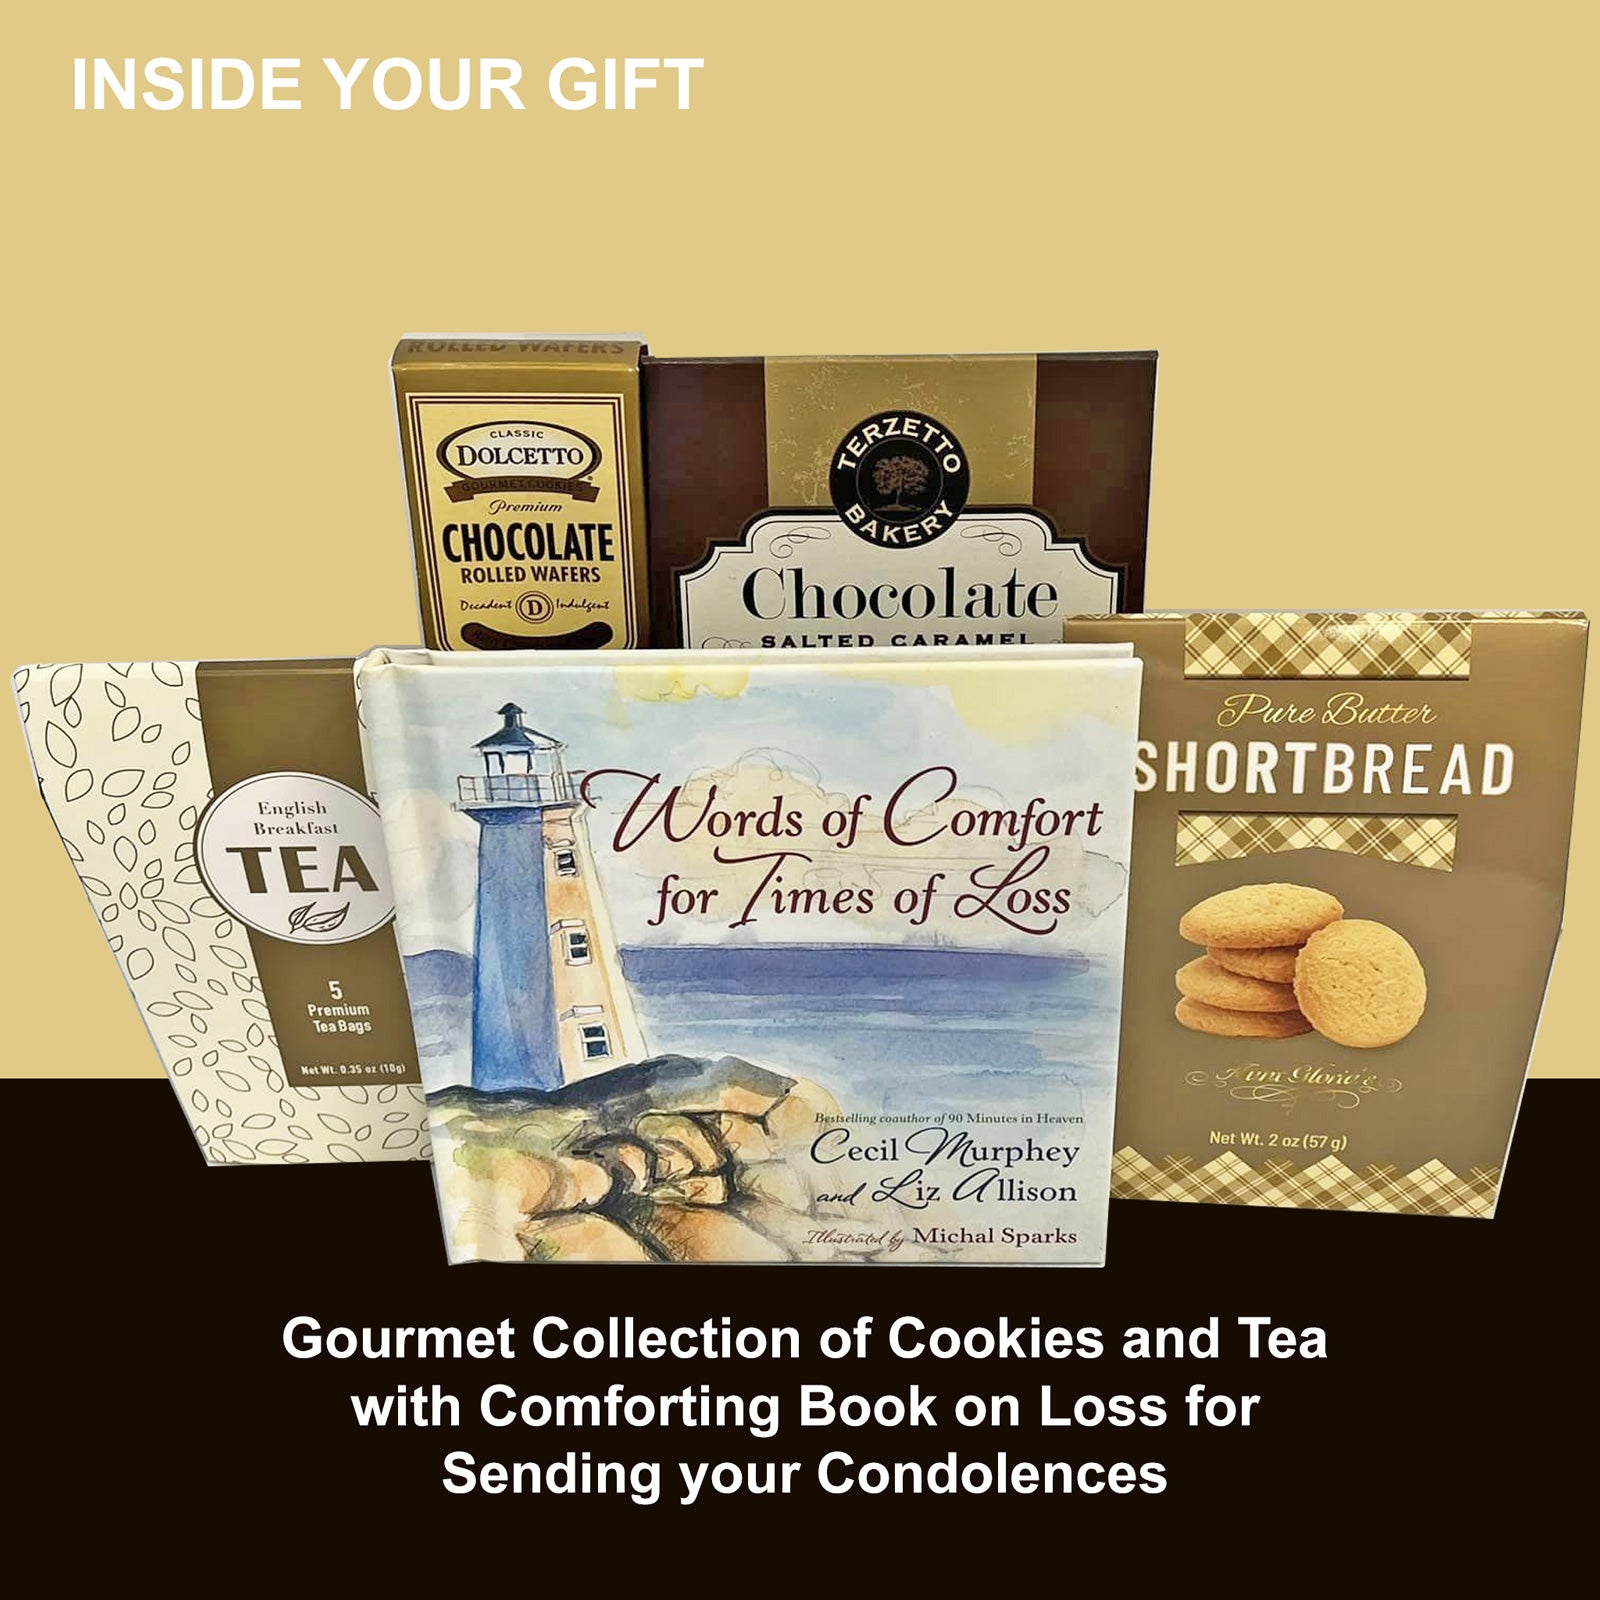 Words of Comfort Sympathy Gift with Book and Food